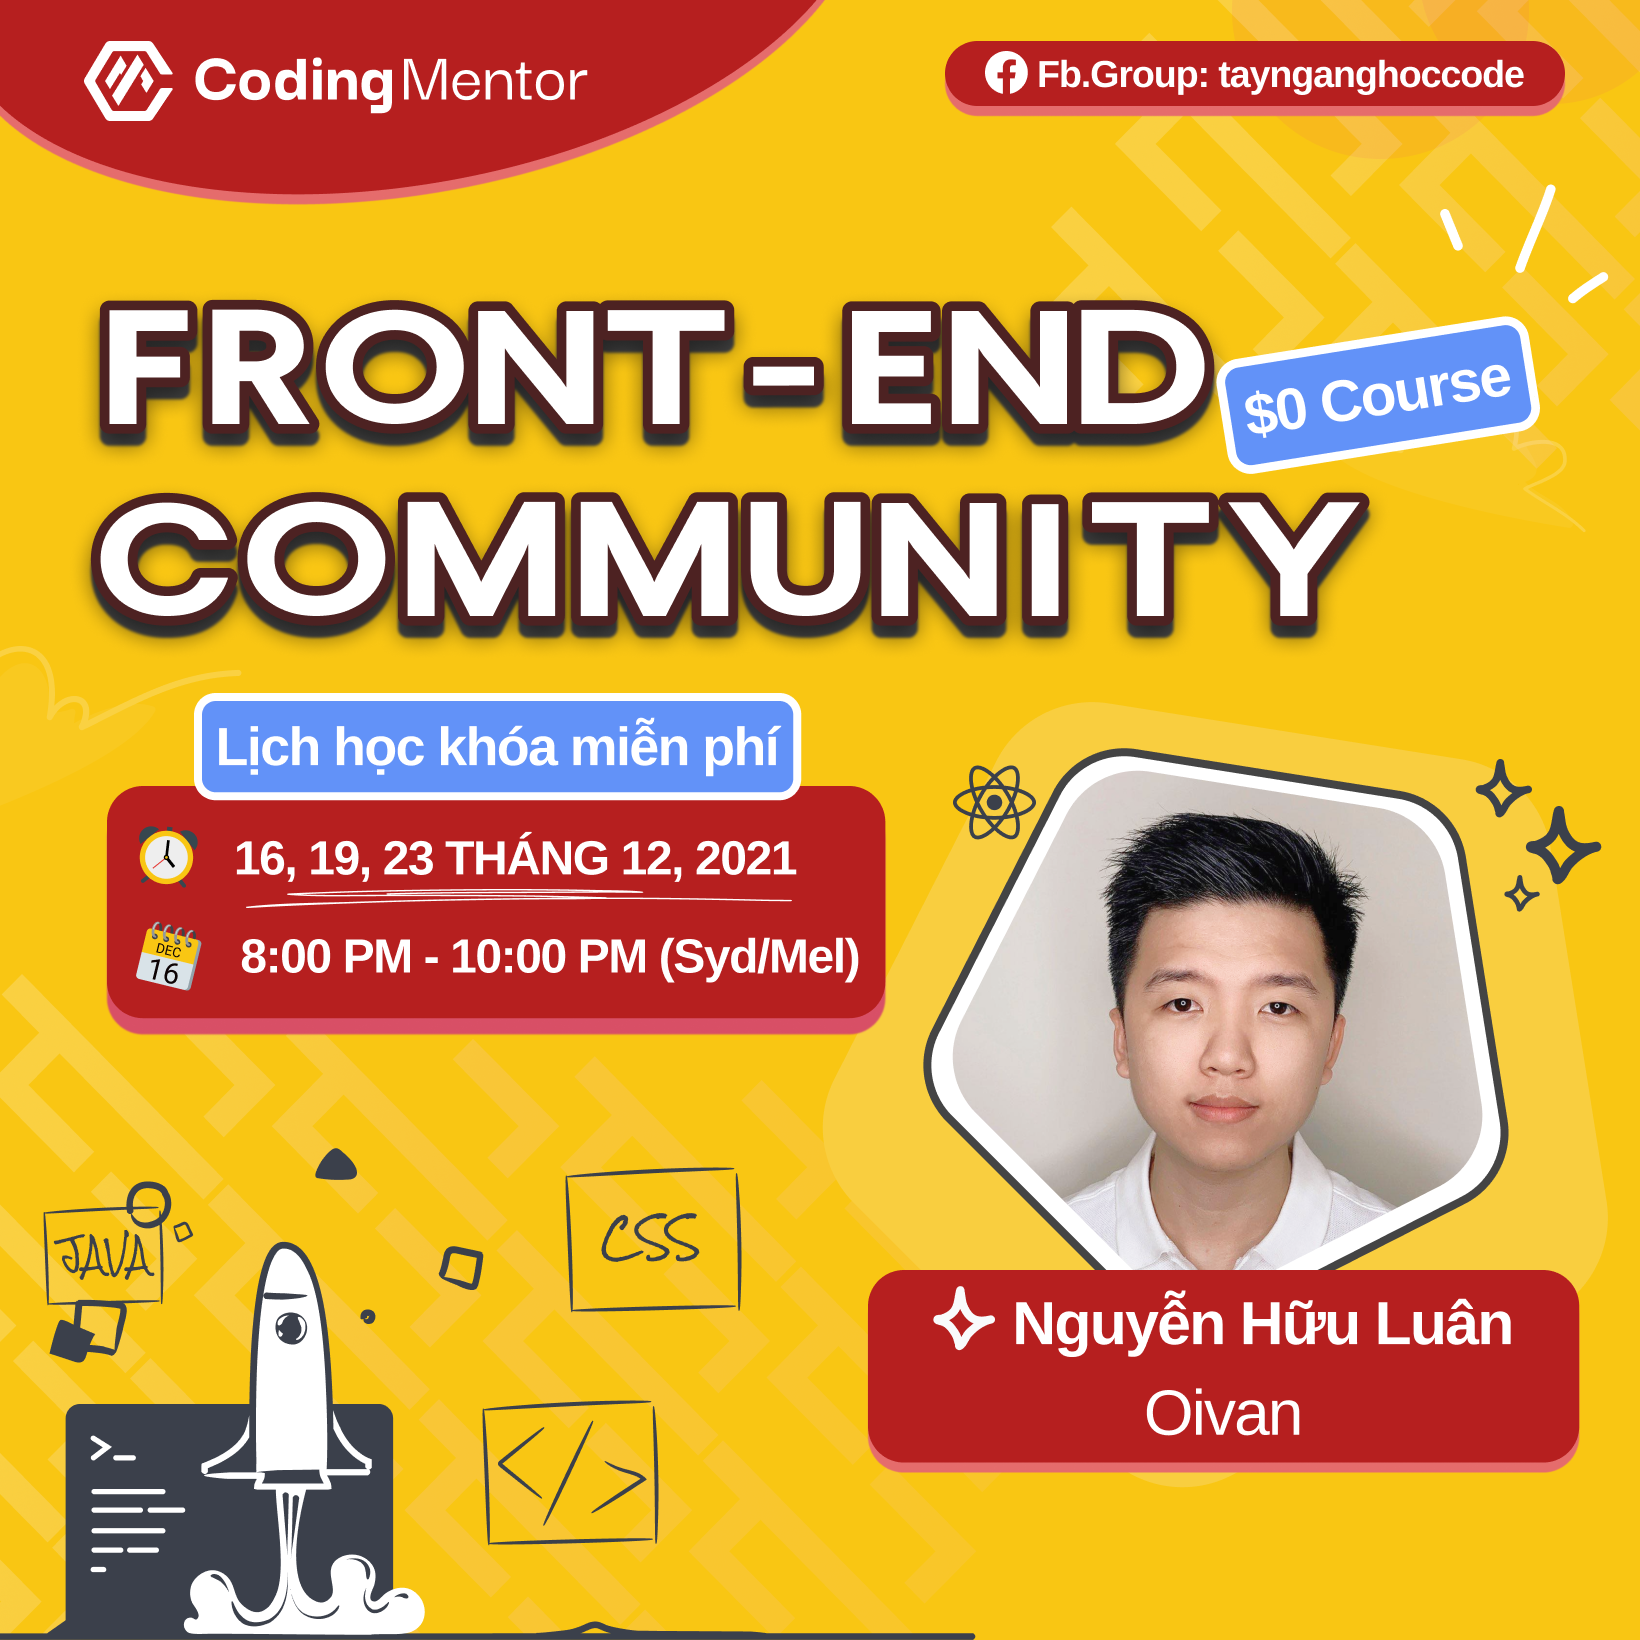 FRONTEND COMMUNITY